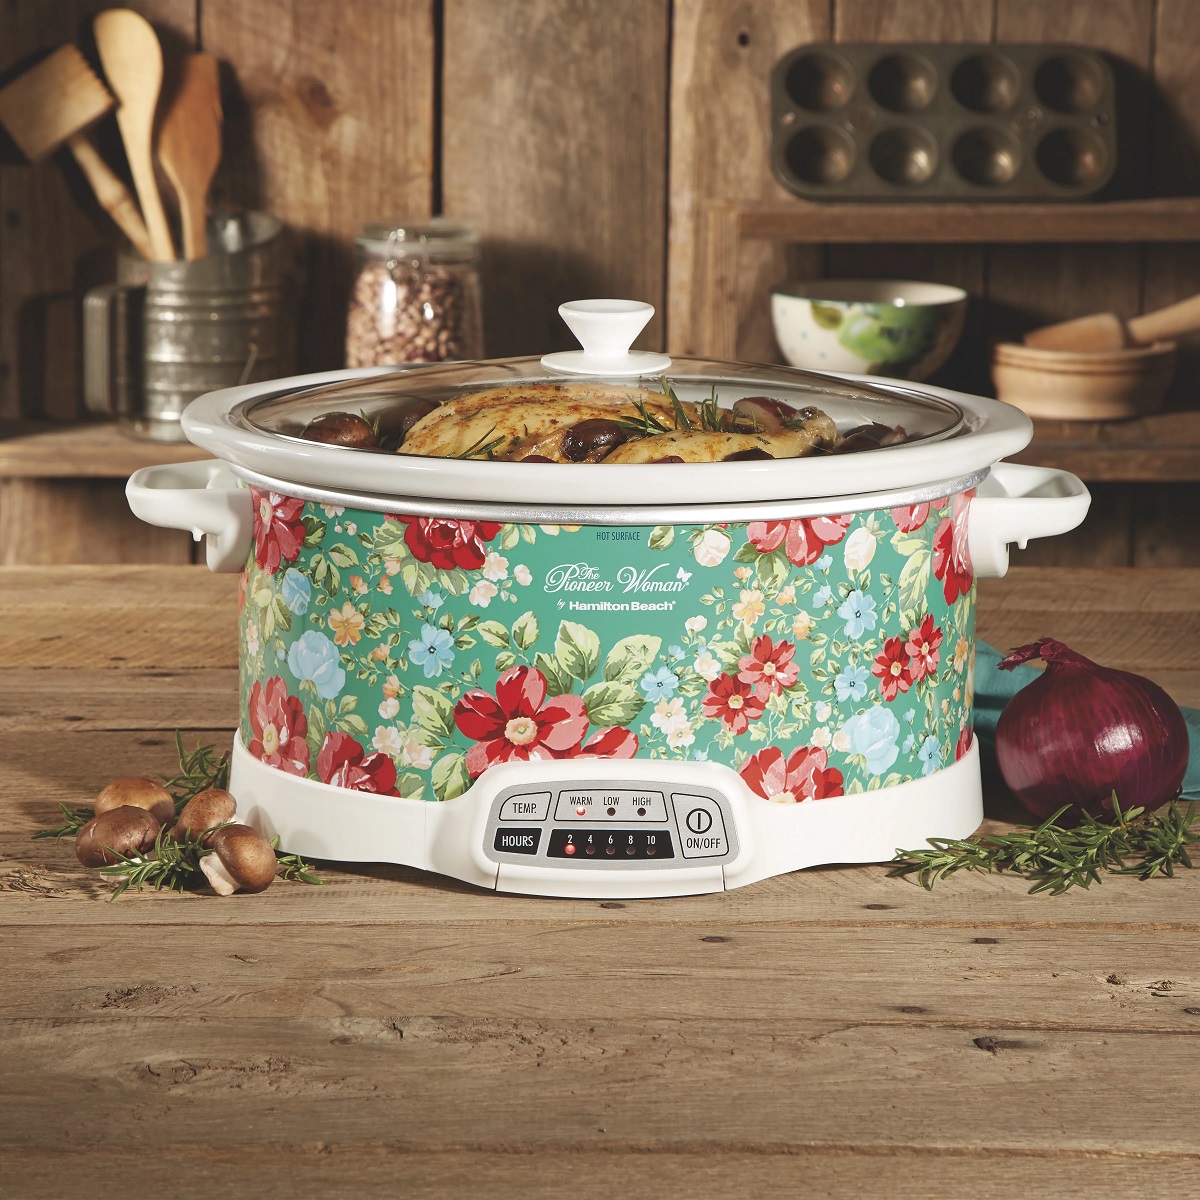 KOOC Small Slow Cooker, 2-Quart, Free Liners Included for Easy Clean-up,  Upgraded Ceramic Pot, Adjustable Temp, Nutrient Loss Reduction, Stainless